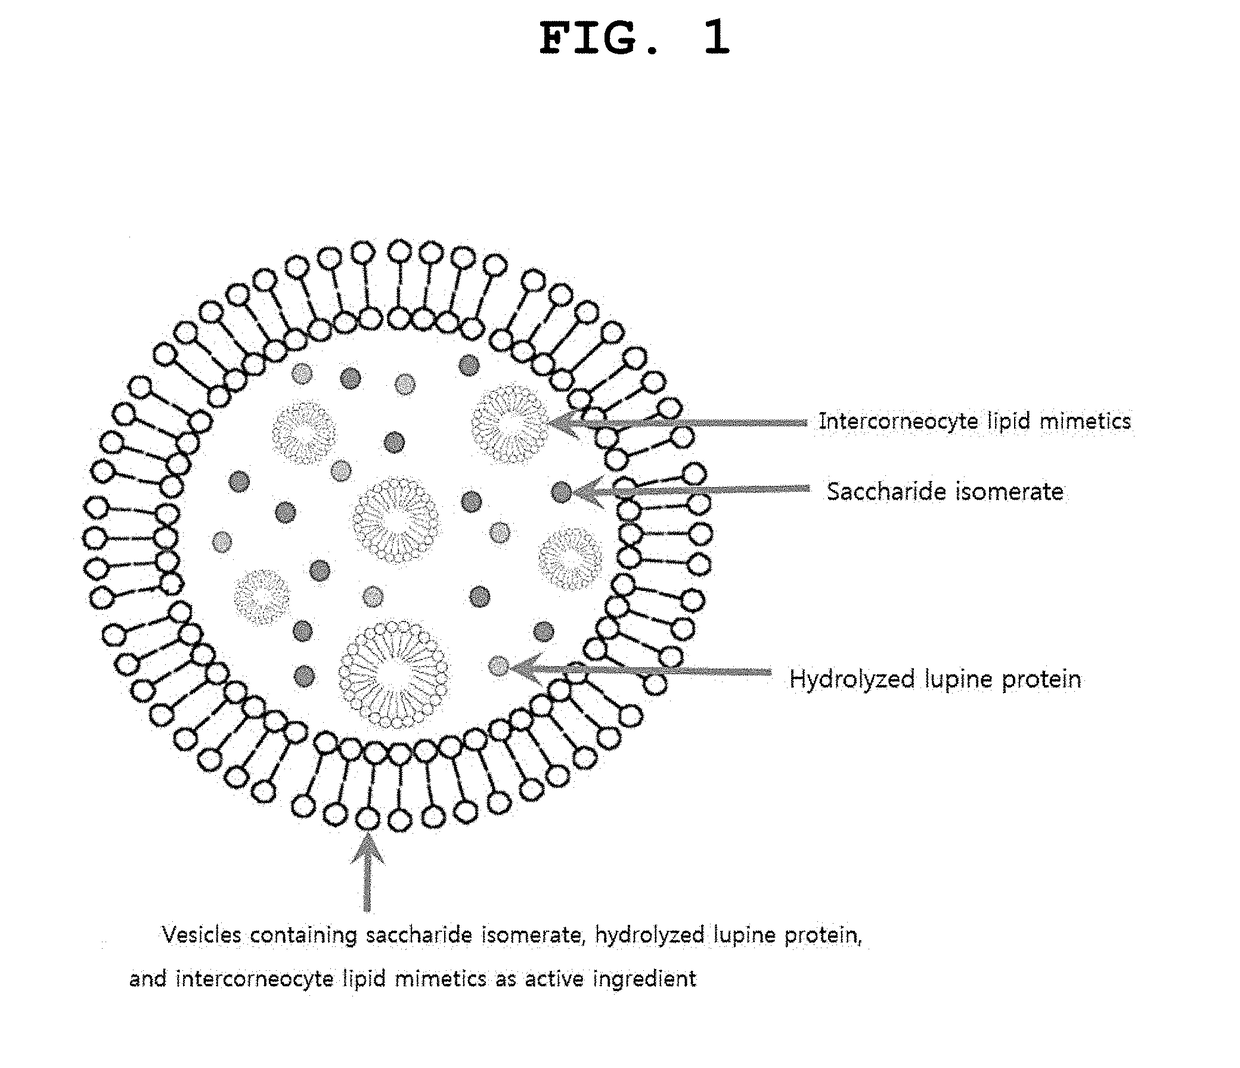 Vesicles containing saccharide isomerate, hydrolyzed lupine protein, and intercorneocyte lipid mimetics as active ingredient, and composition for skin external application comprising the same